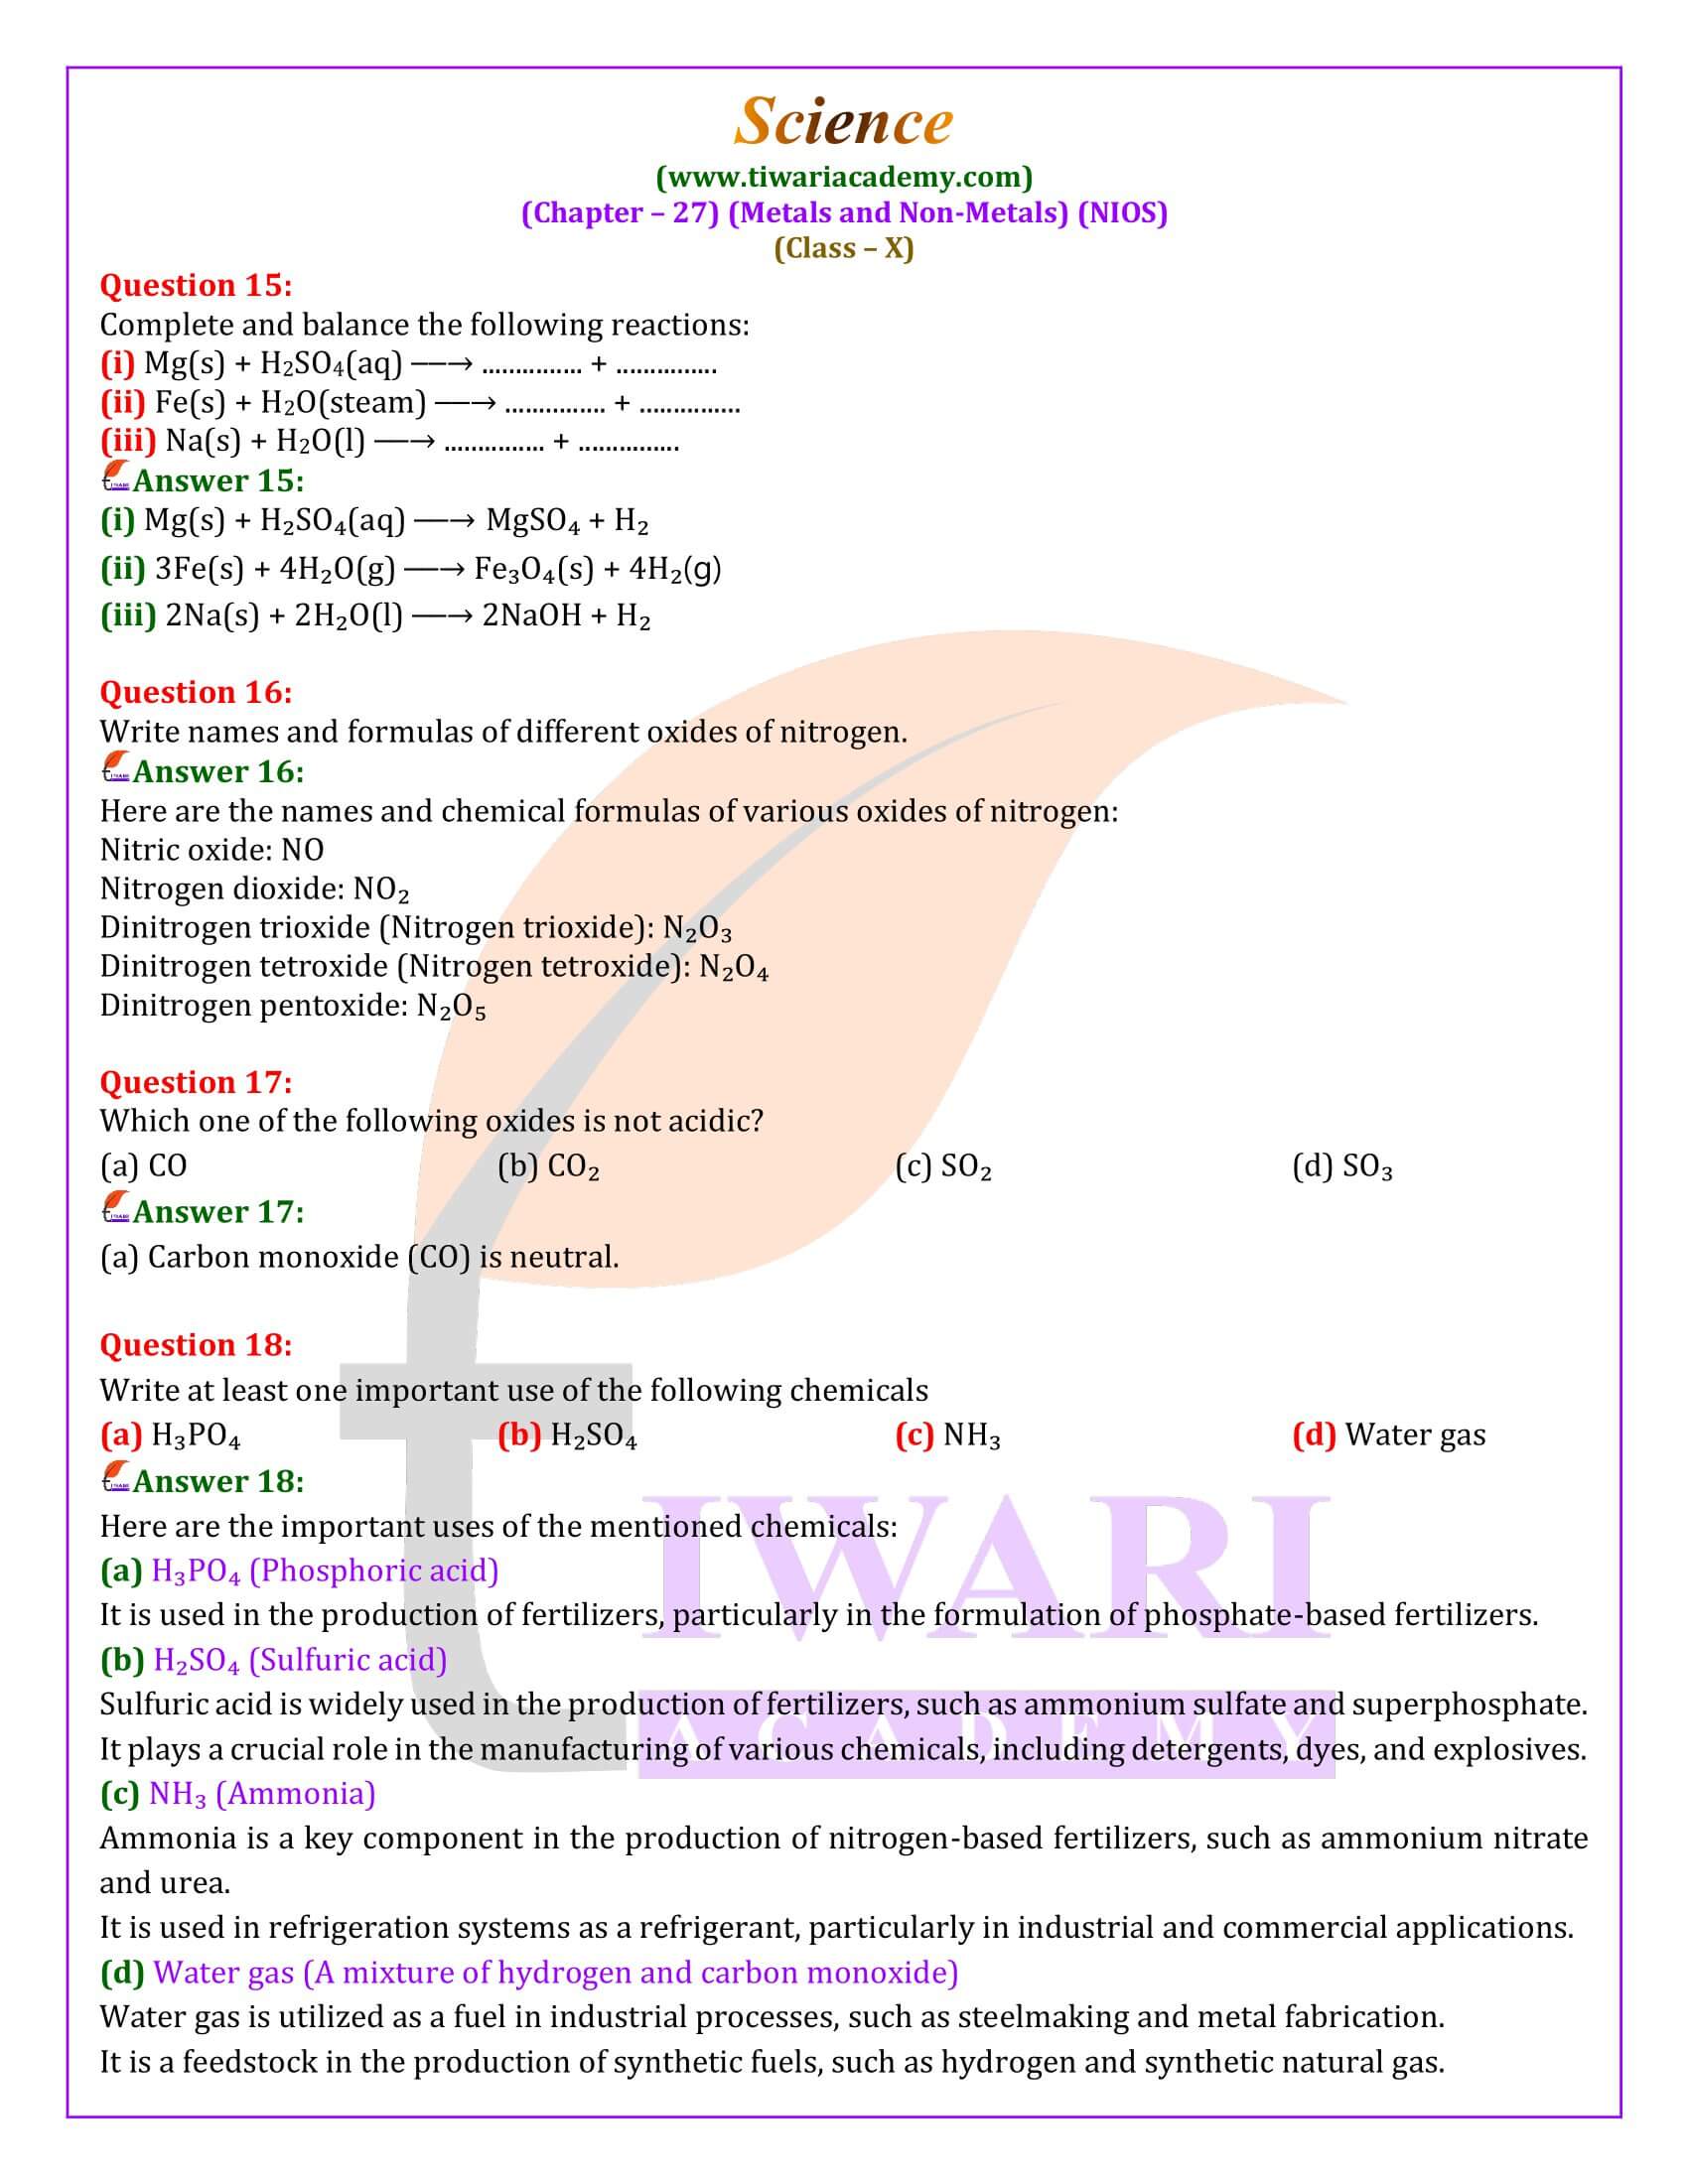 NIOS Class 10 Science Chapter 27 Exercises